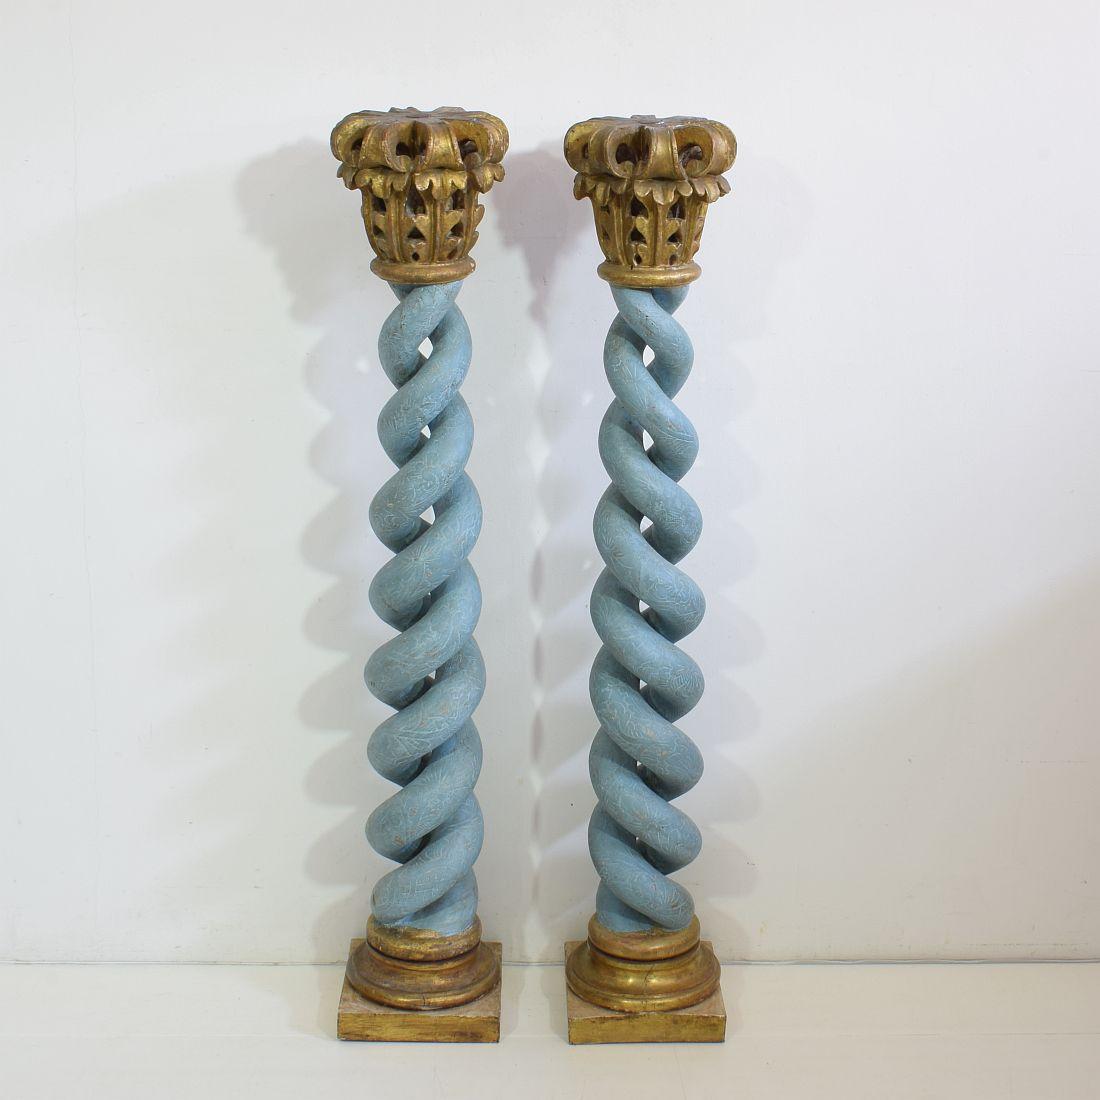 Unique pair of carved wooden dubble spiral columns with stunning color and gilding.
Italy, circa 1750. Weathered, small losses.